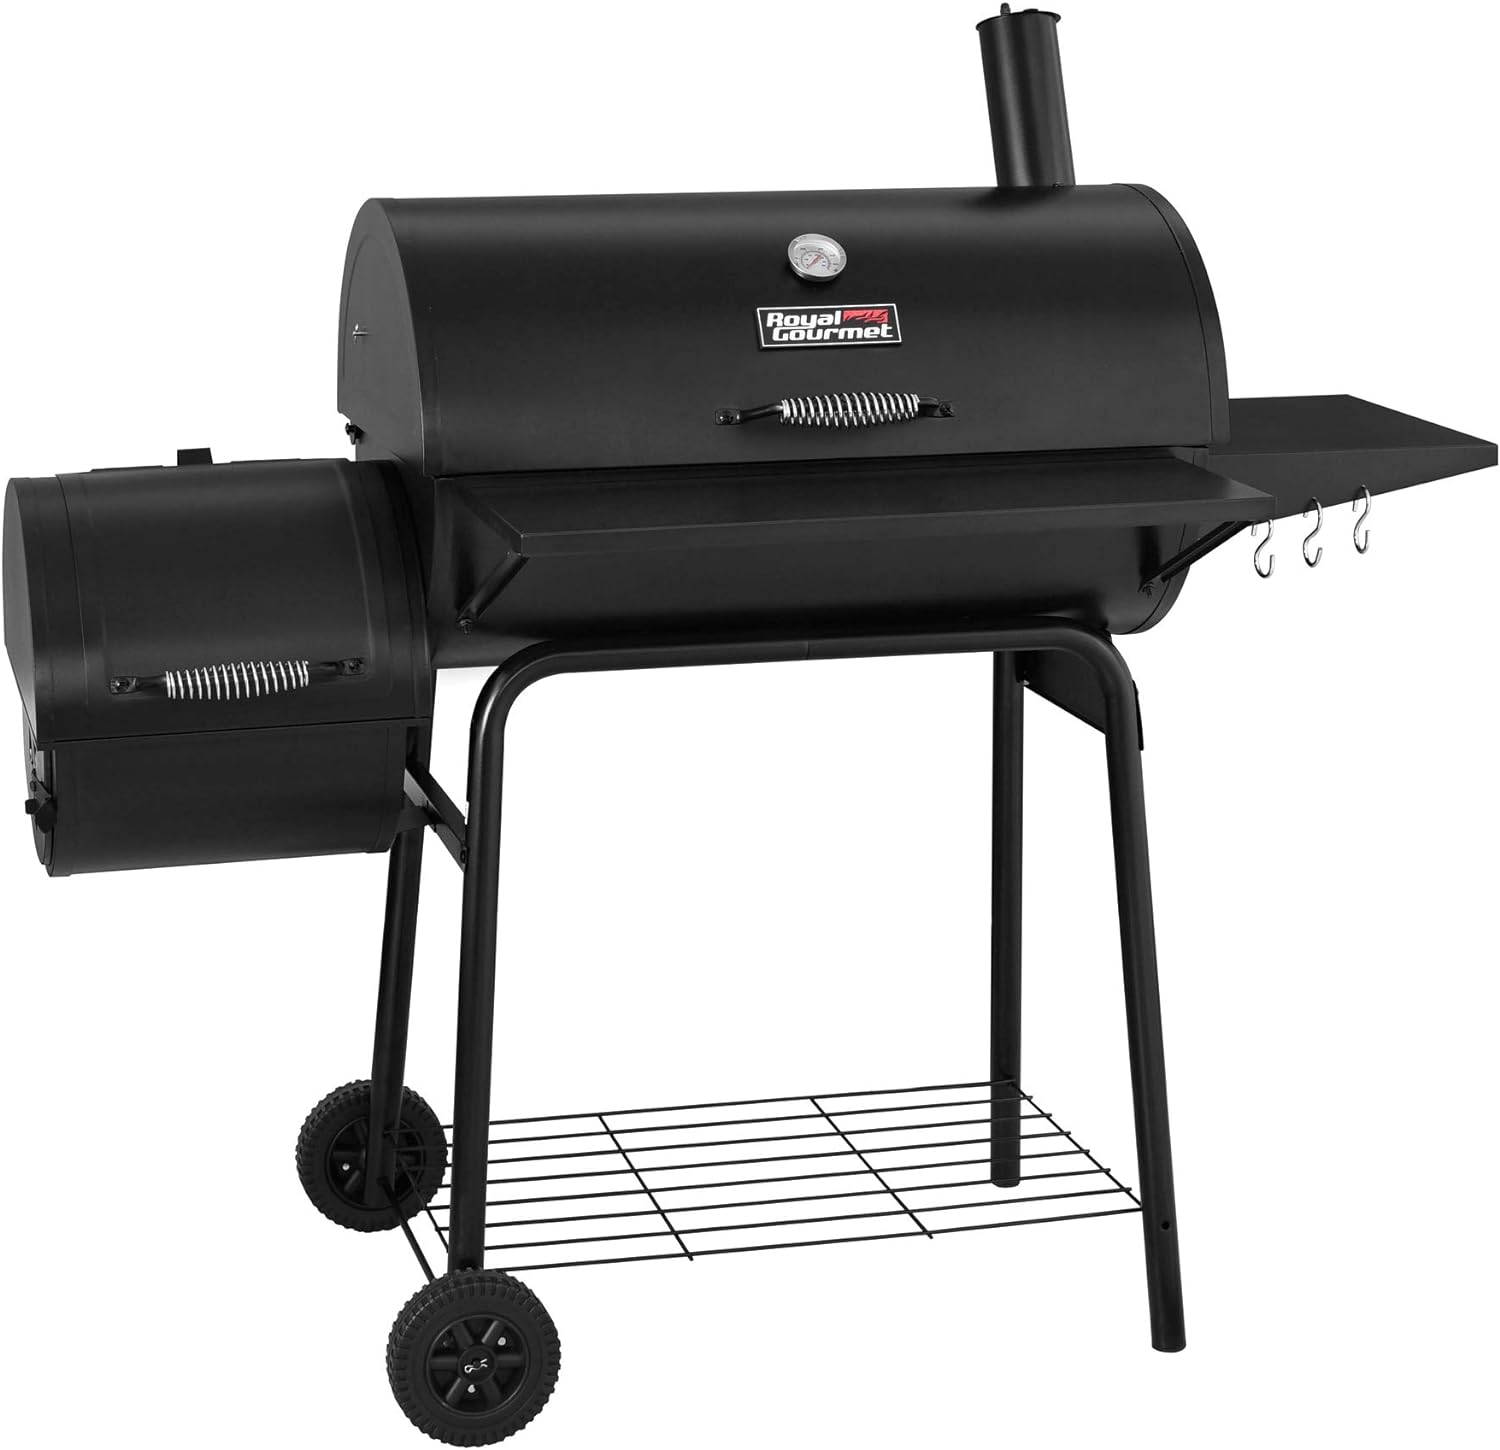 Royal Gourmet CC1830S 30 BBQ Charcoal Grill and Offset Smoker | 811 Square Inch cooking surface, Outdoor for Camping | Black